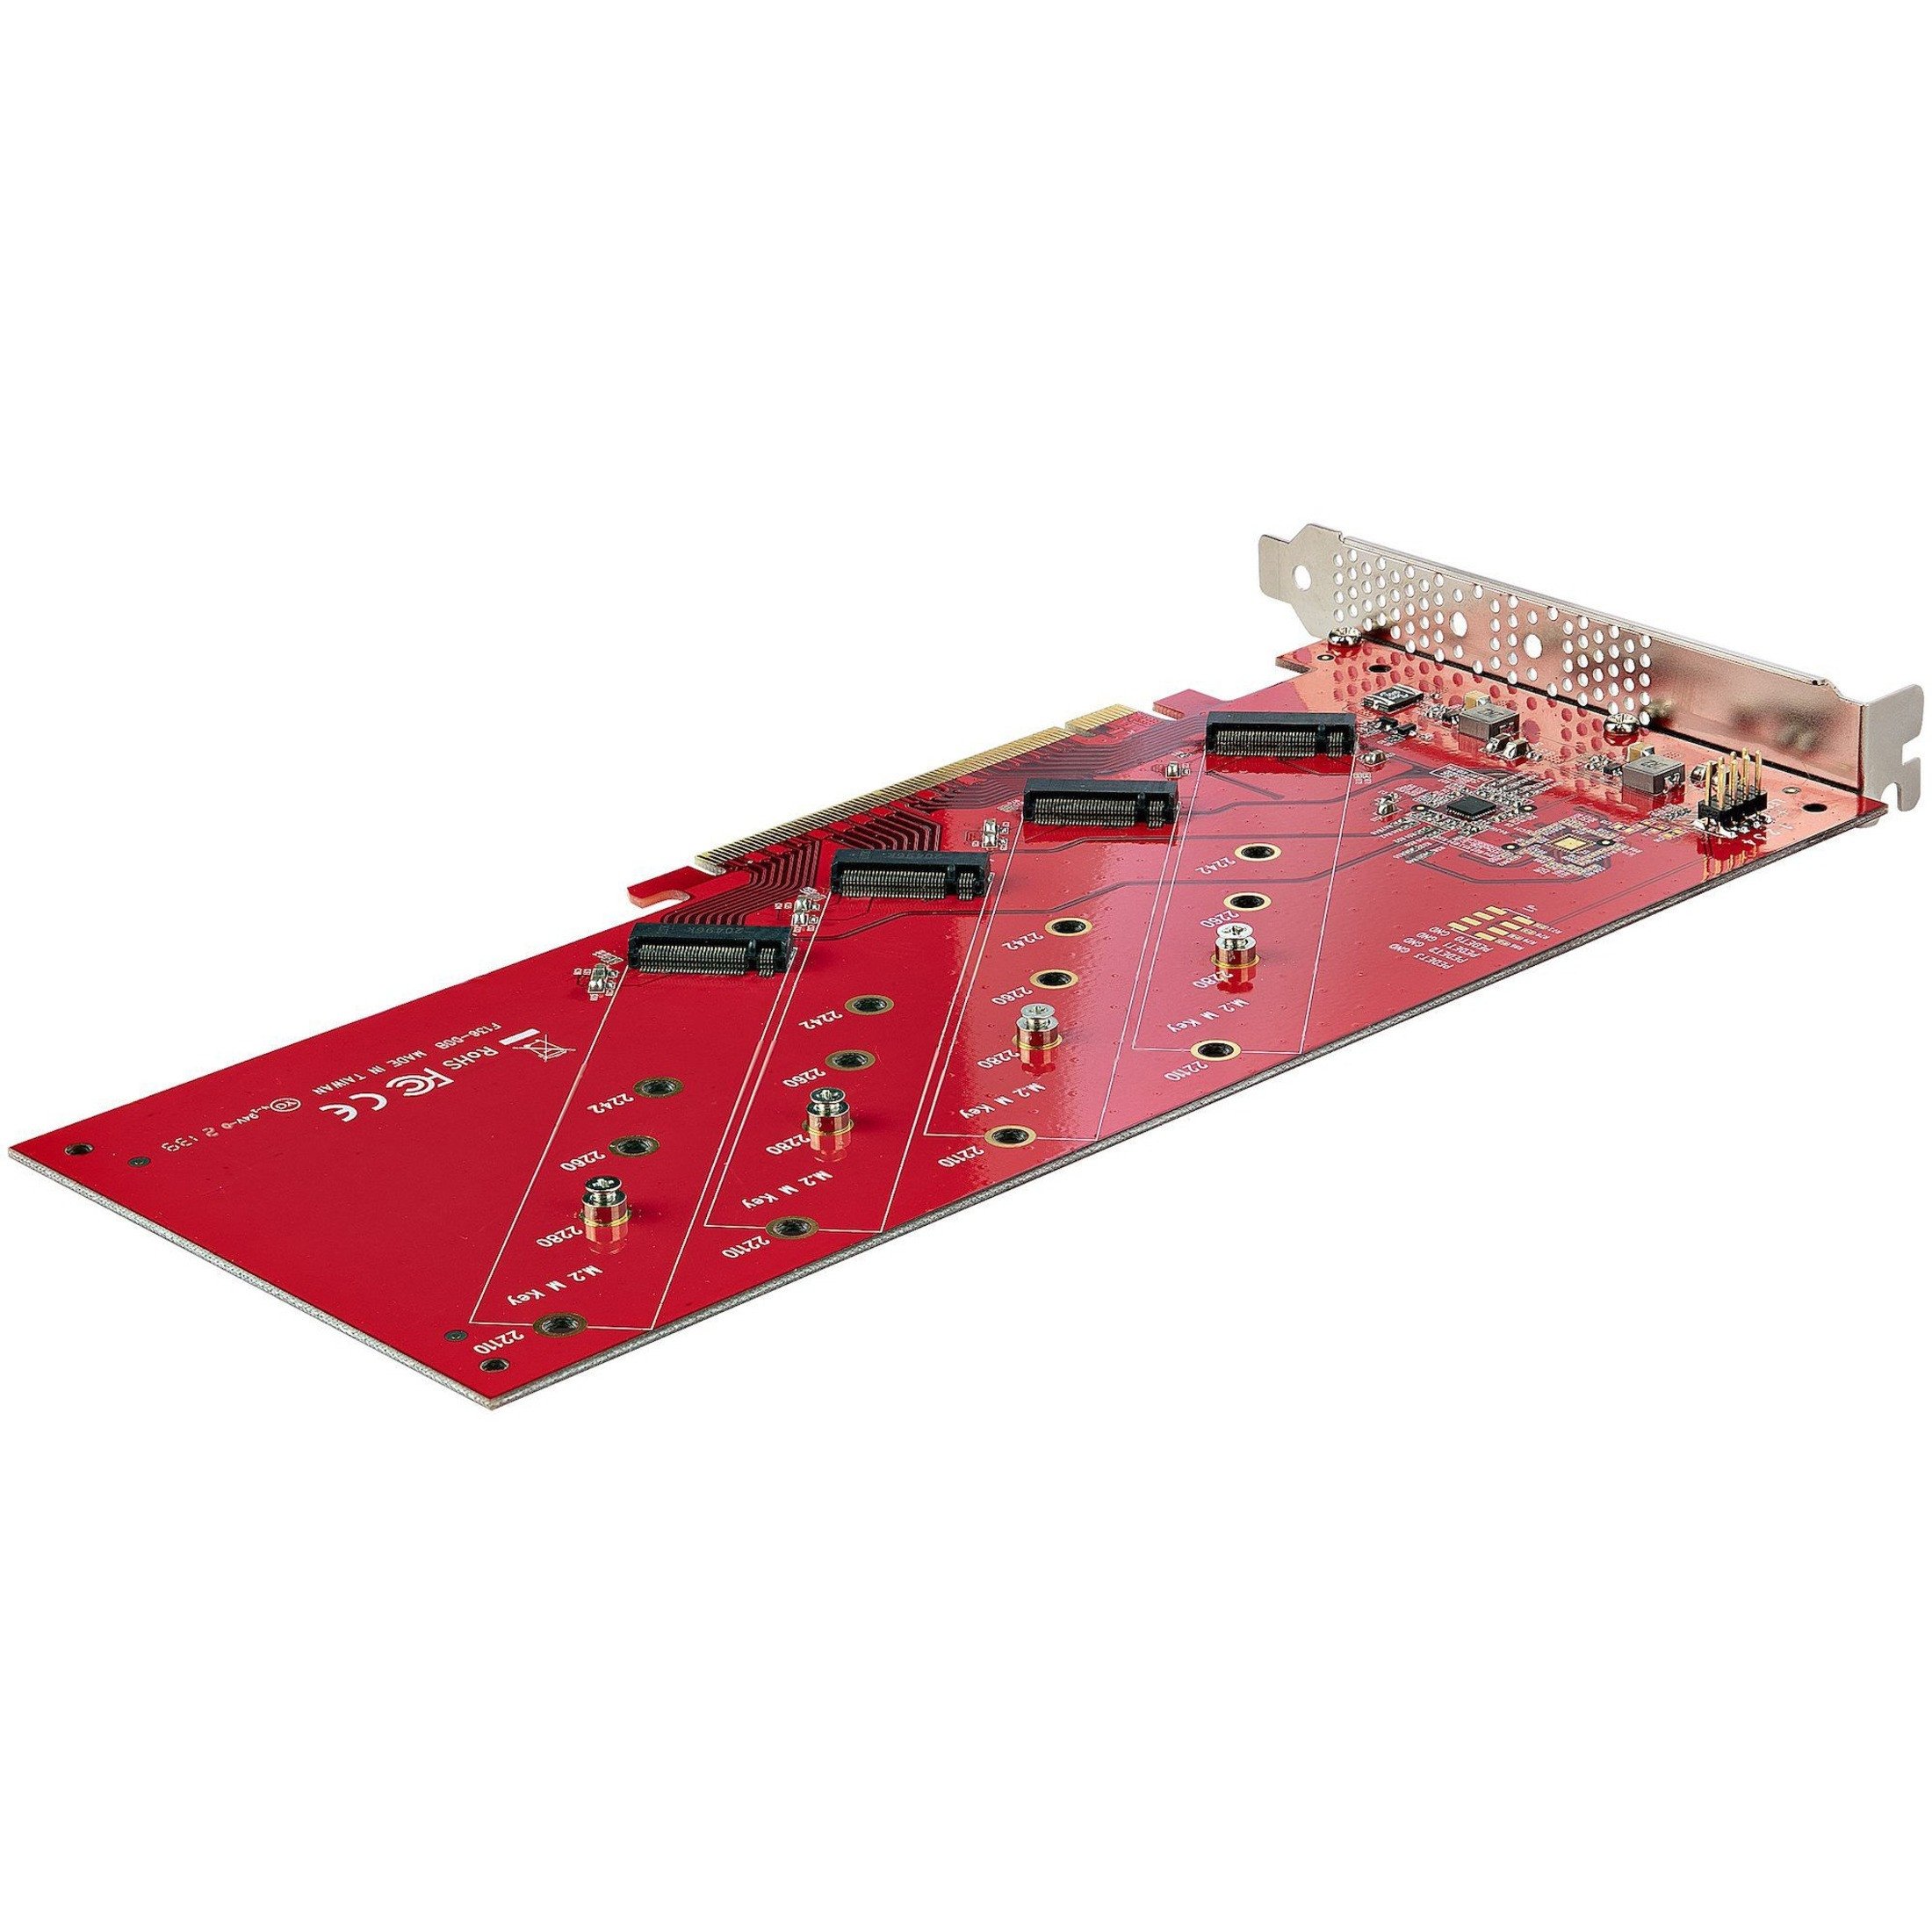 regelmatig Begeleiden overtuigen Startech .com Quad M.2 PCIe Adapter Card, x16 Quad NVMe or AHCI M.2 SSD to  PCI Express 4.0, Up to 7.8GBps/Drive, For 2242/2260/2280/2... QUAD-M2-PCIE-CARD-B  - Corporate Armor